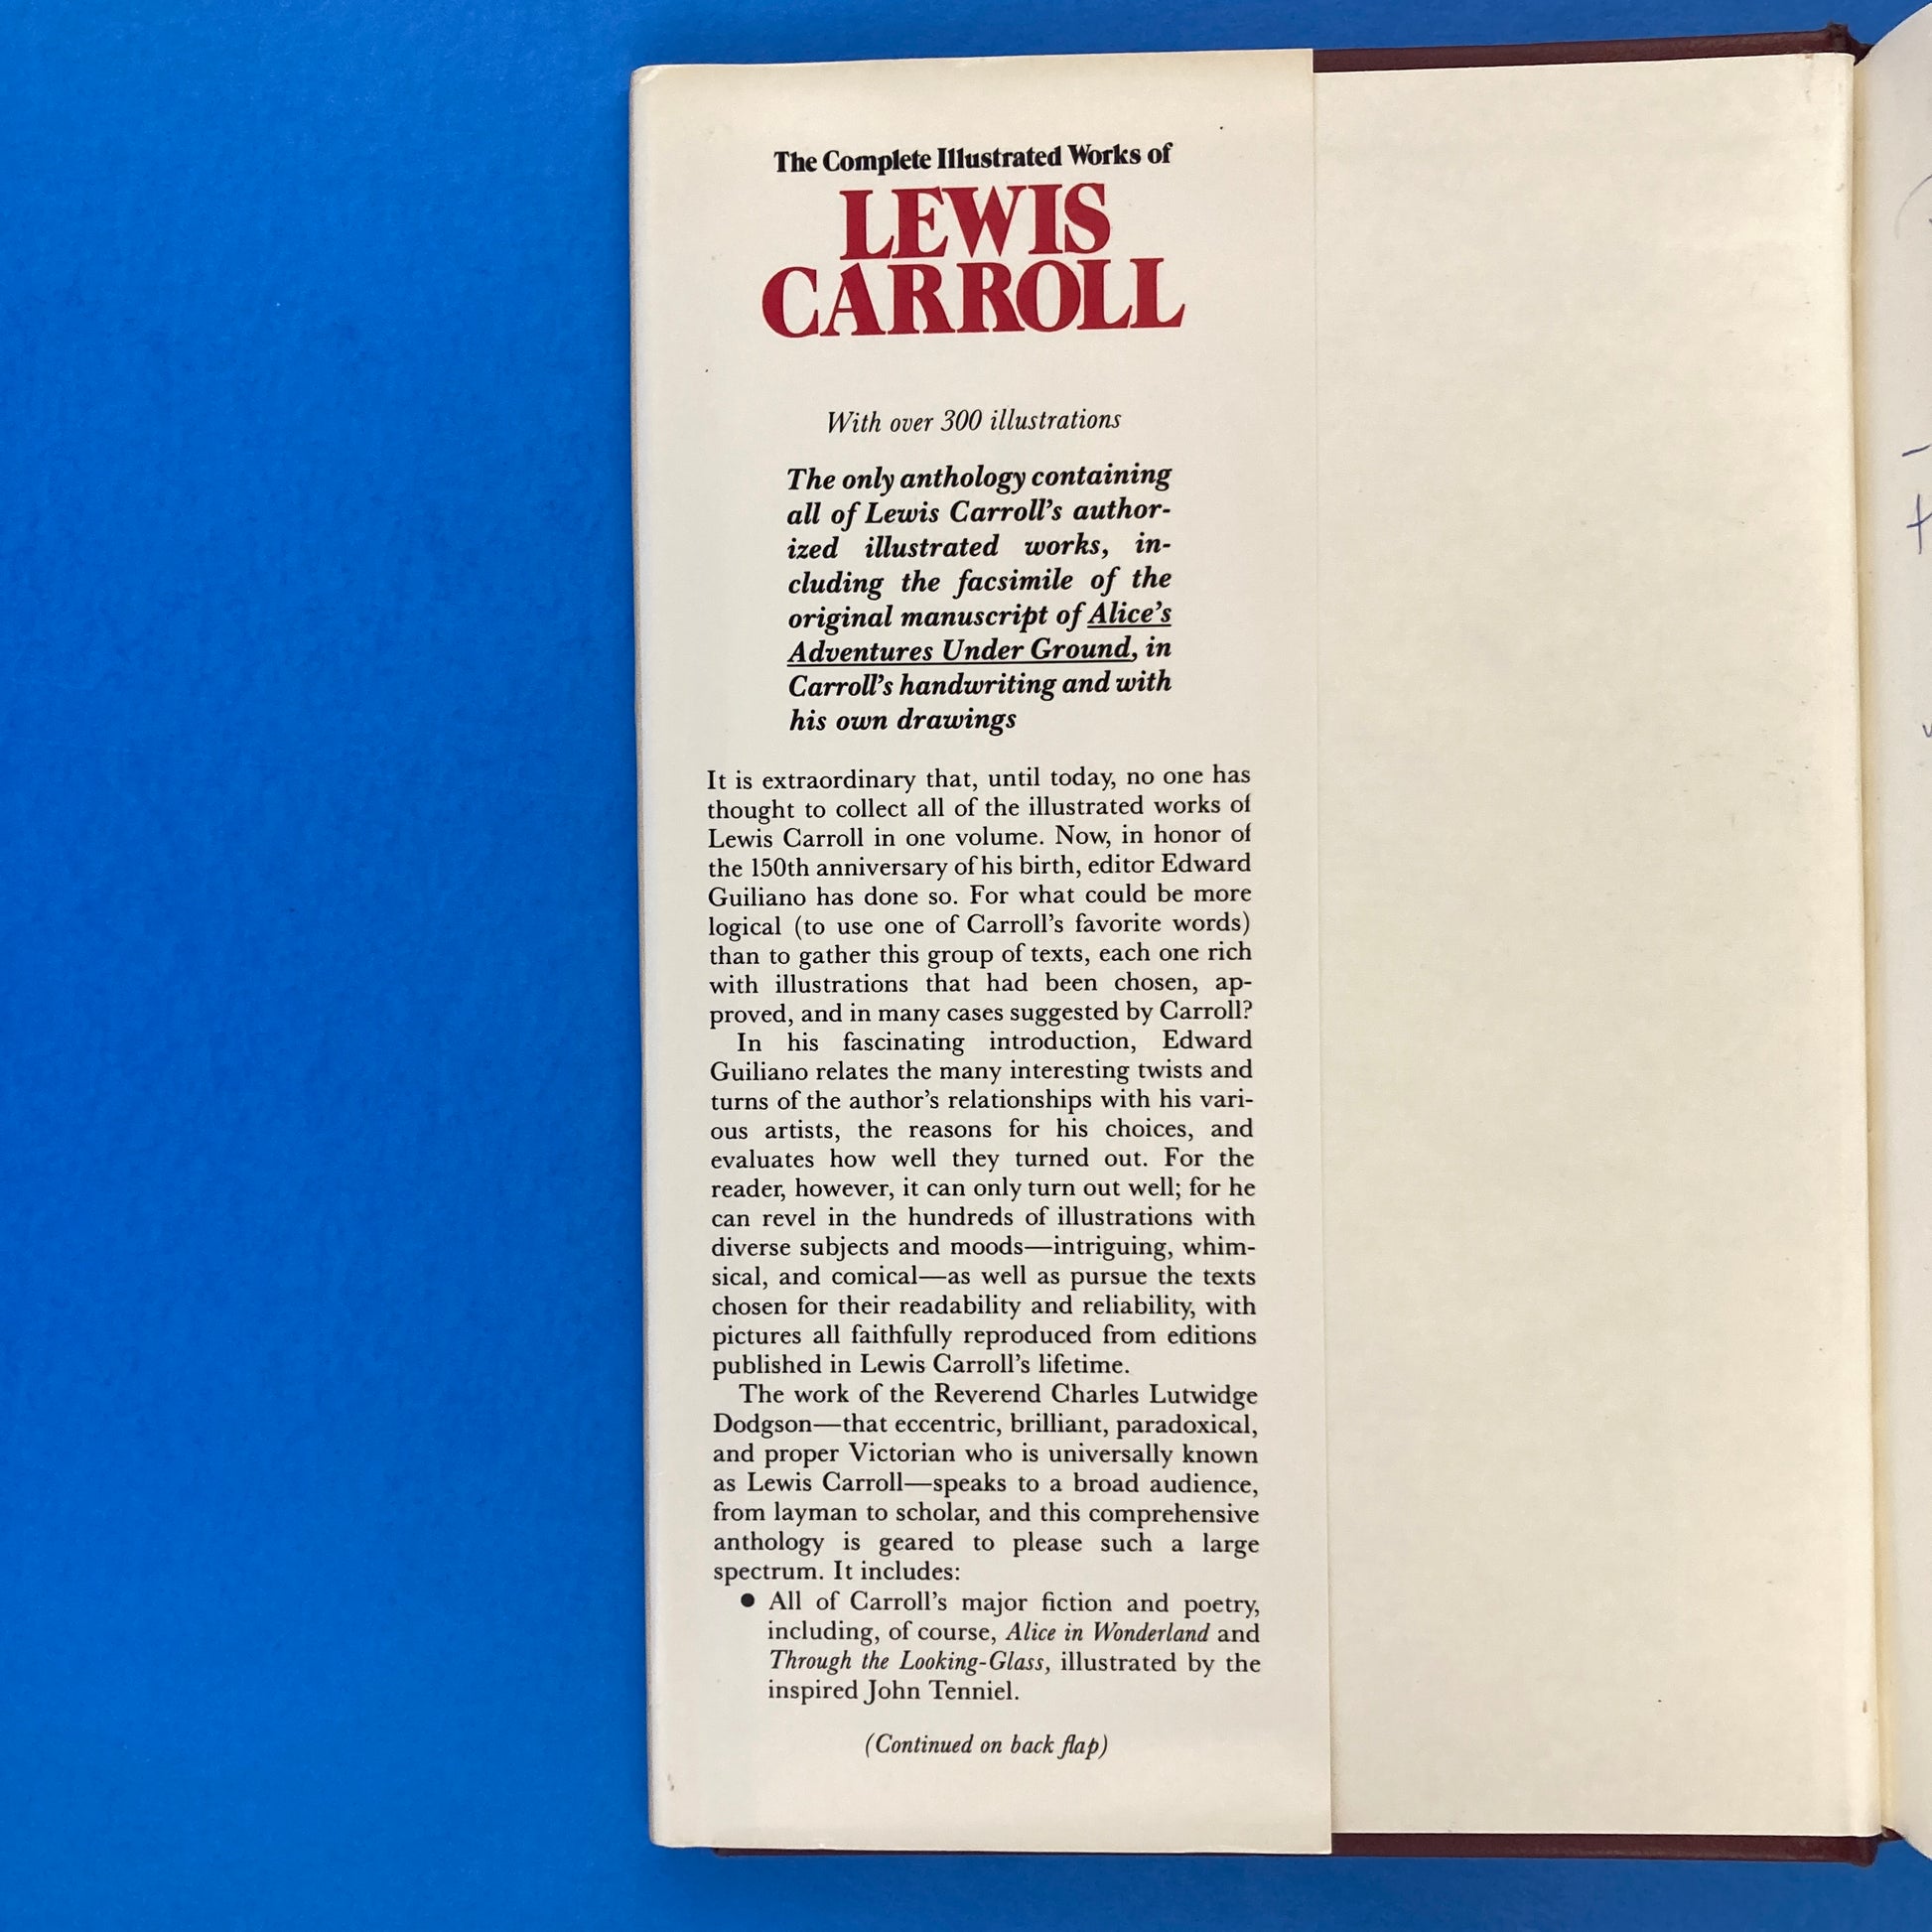 The Complete Illustrated Works of Lewis Carroll, 1990 LONDON